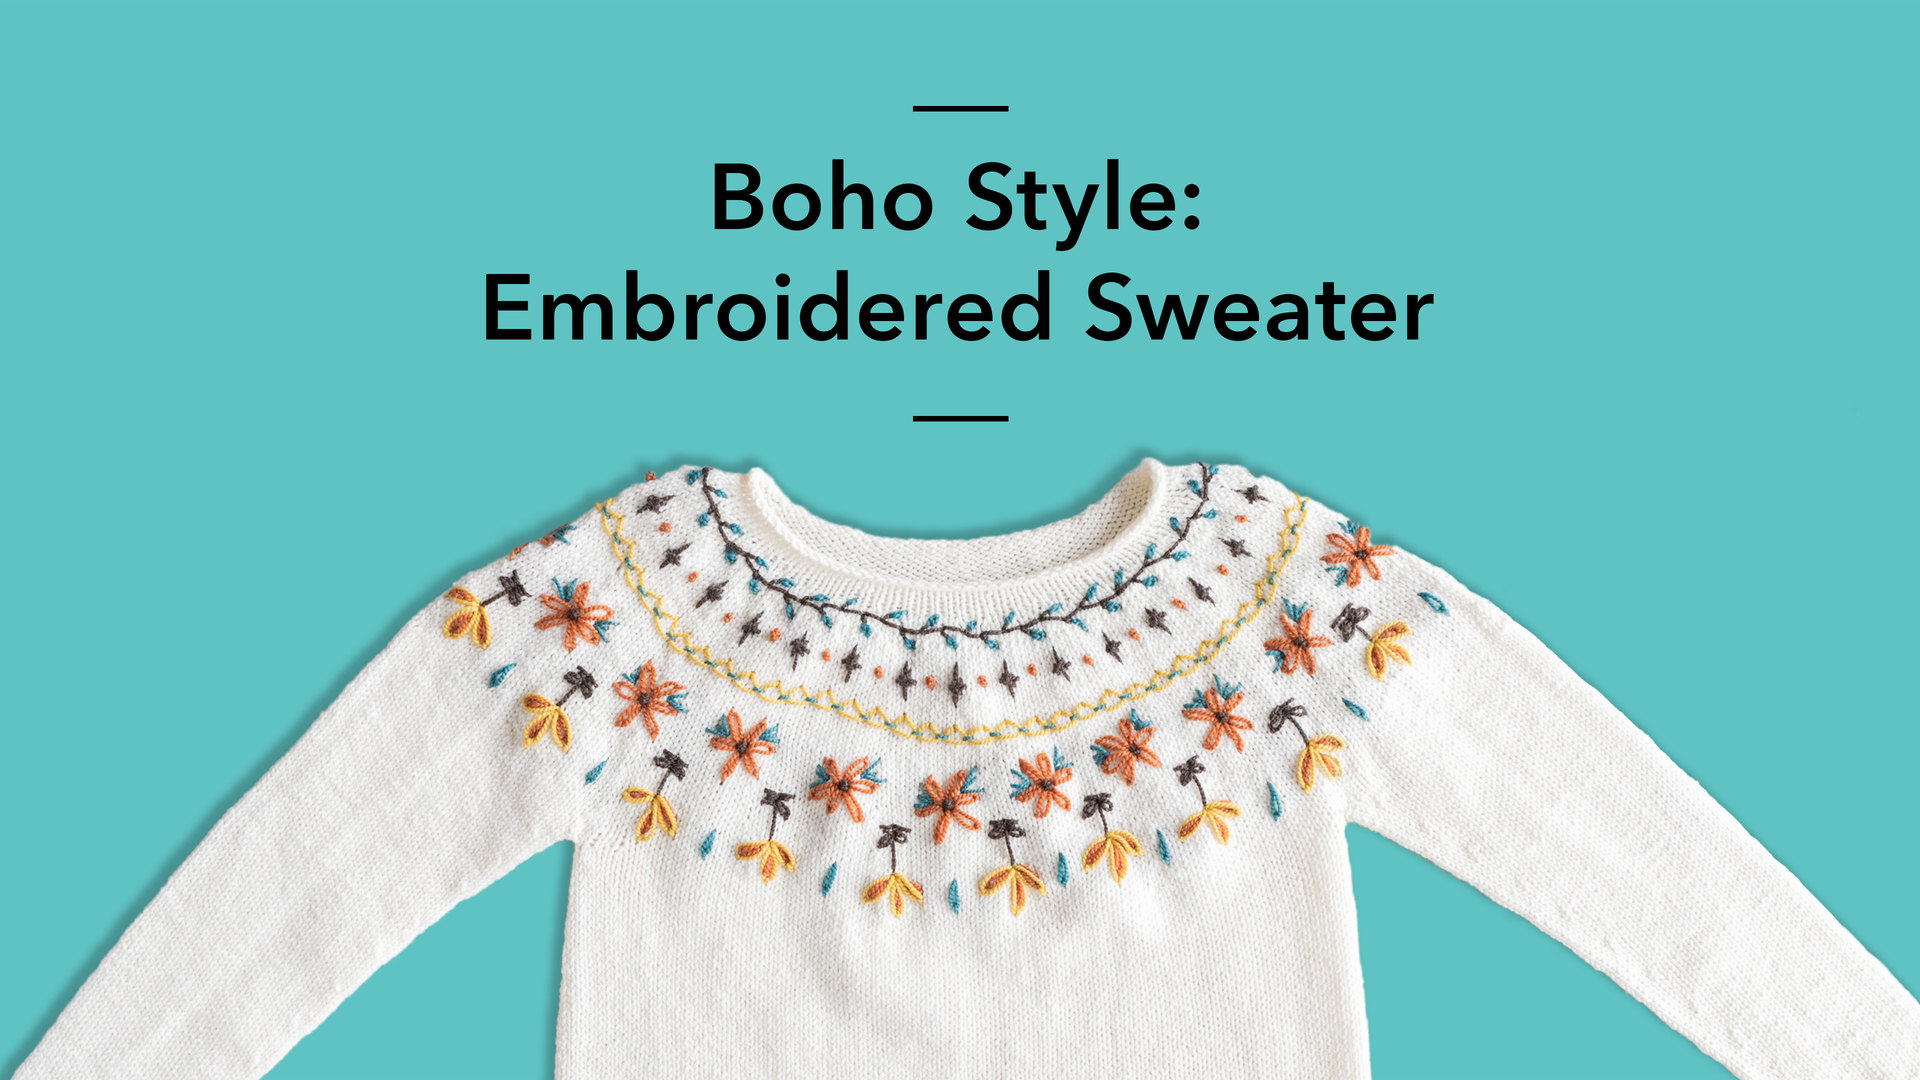 Boho Style: Embroidered Sweater | Craftsy | www.craftsy.com